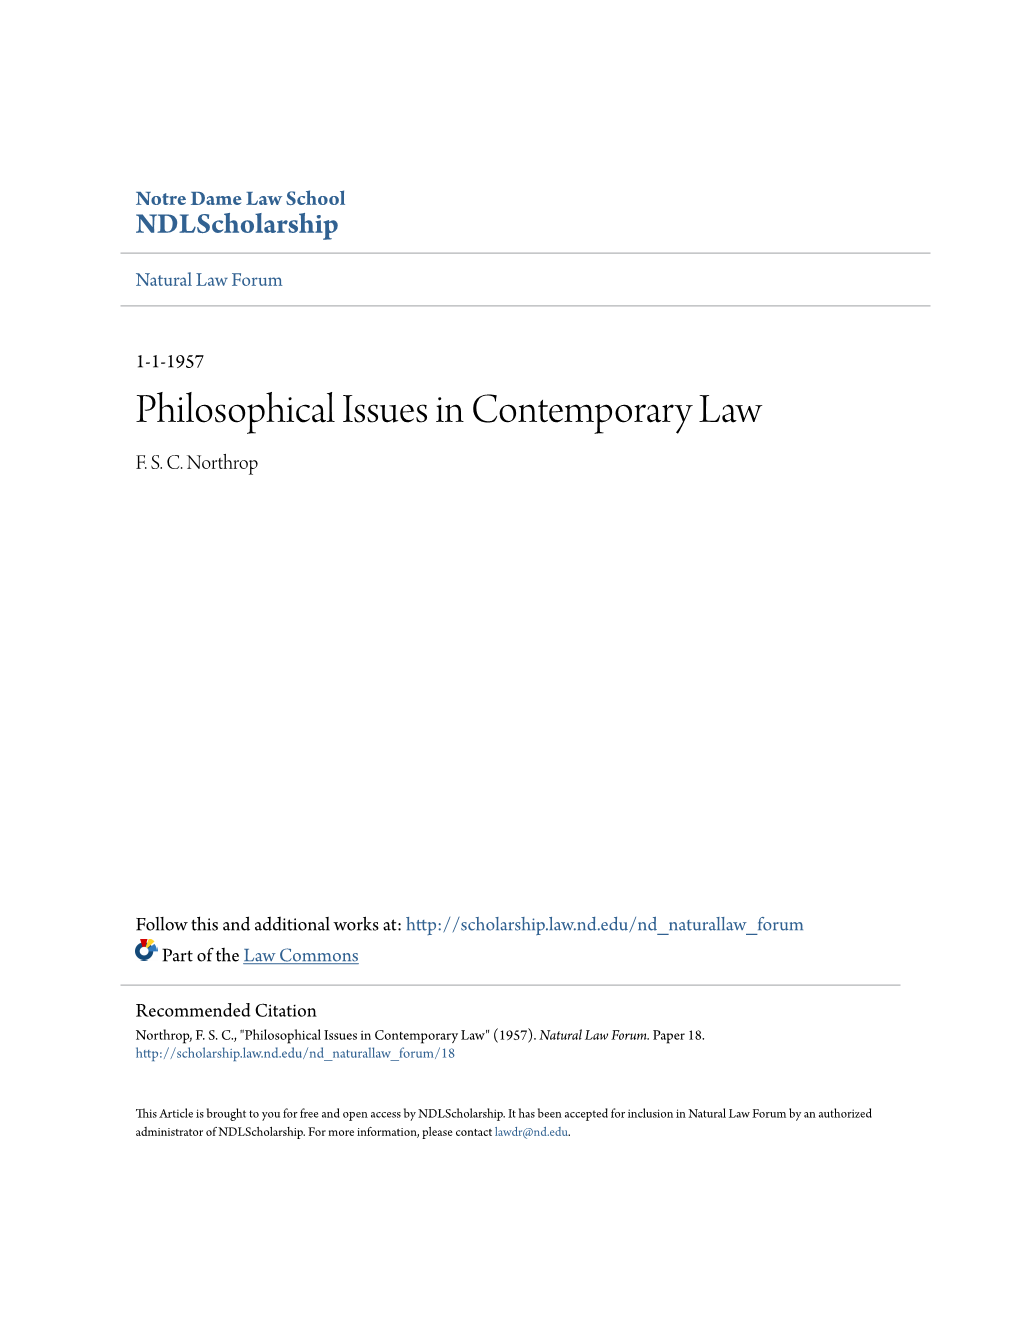 Philosophical Issues in Contemporary Law F